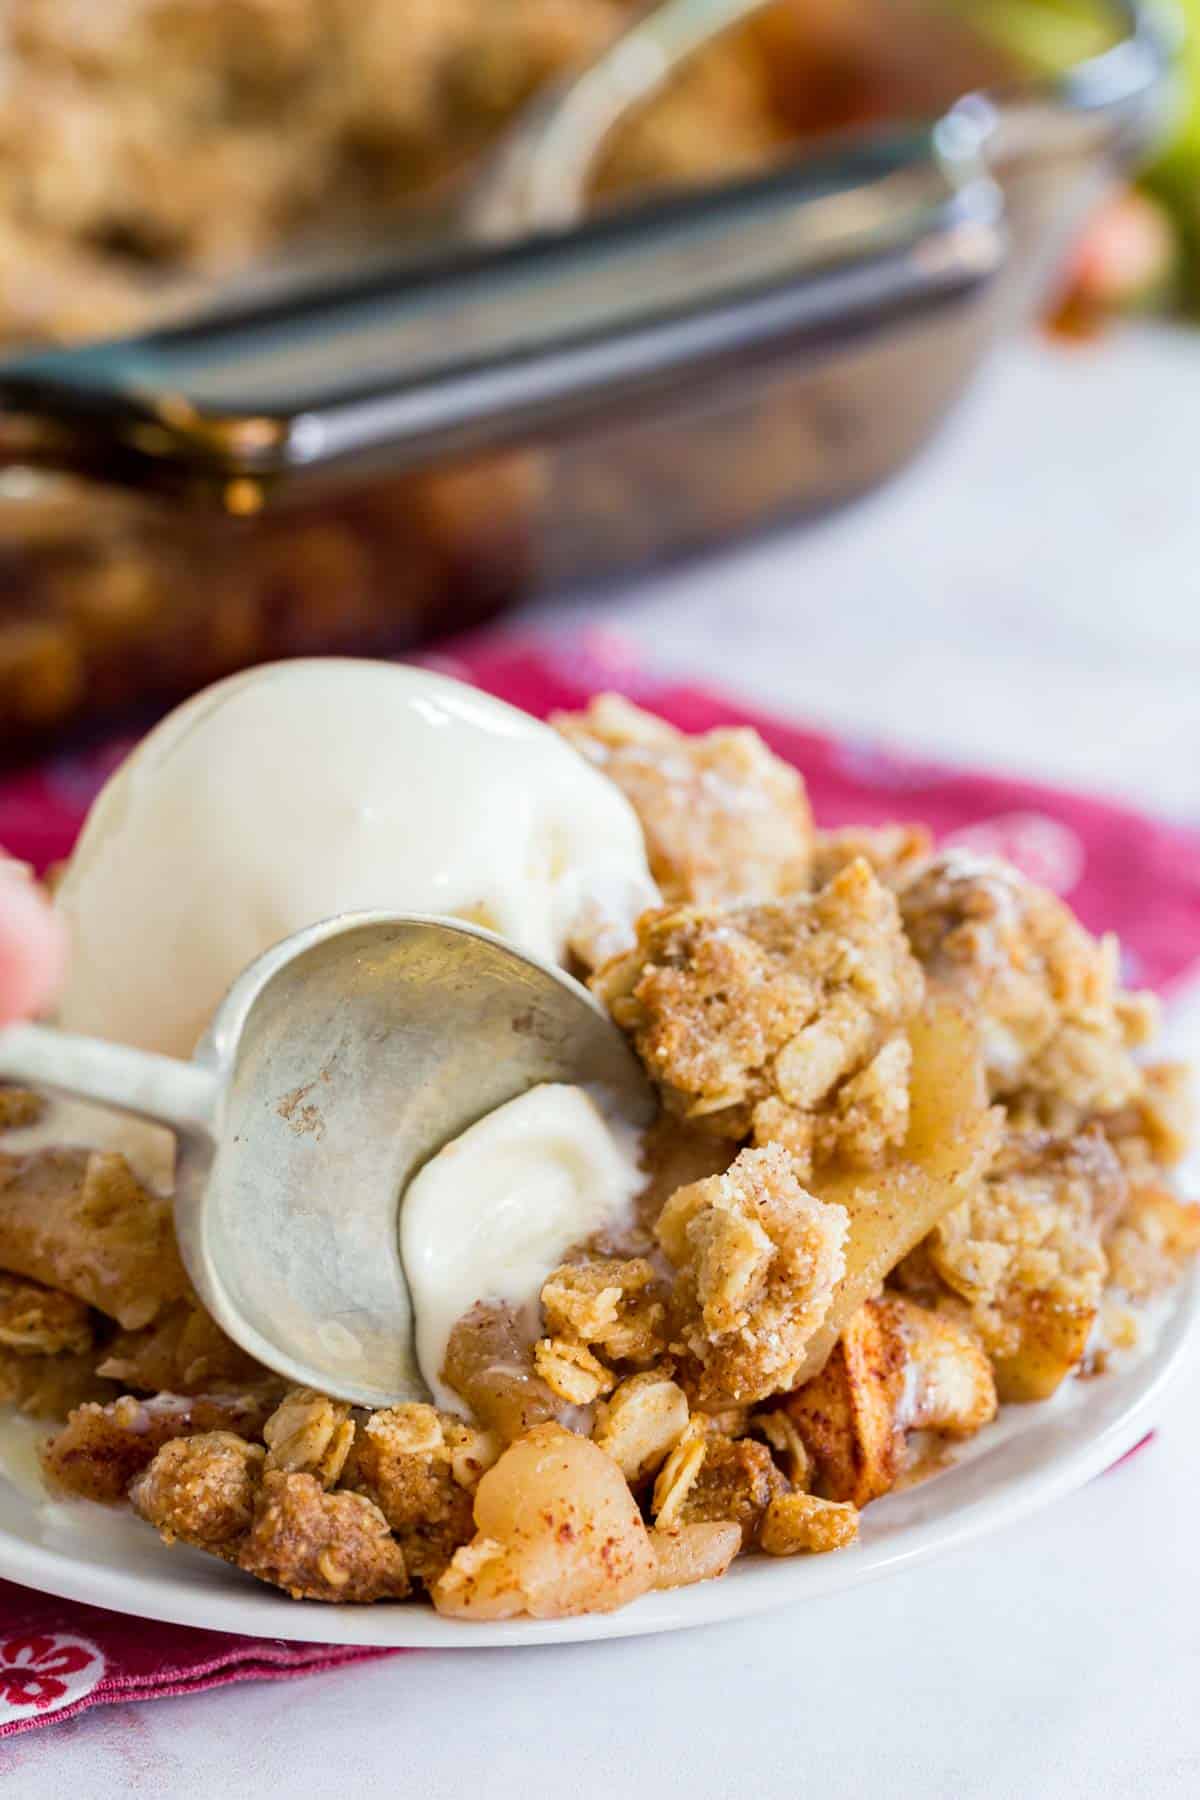 using a spoon to get a bite of apple crisp and ice cream